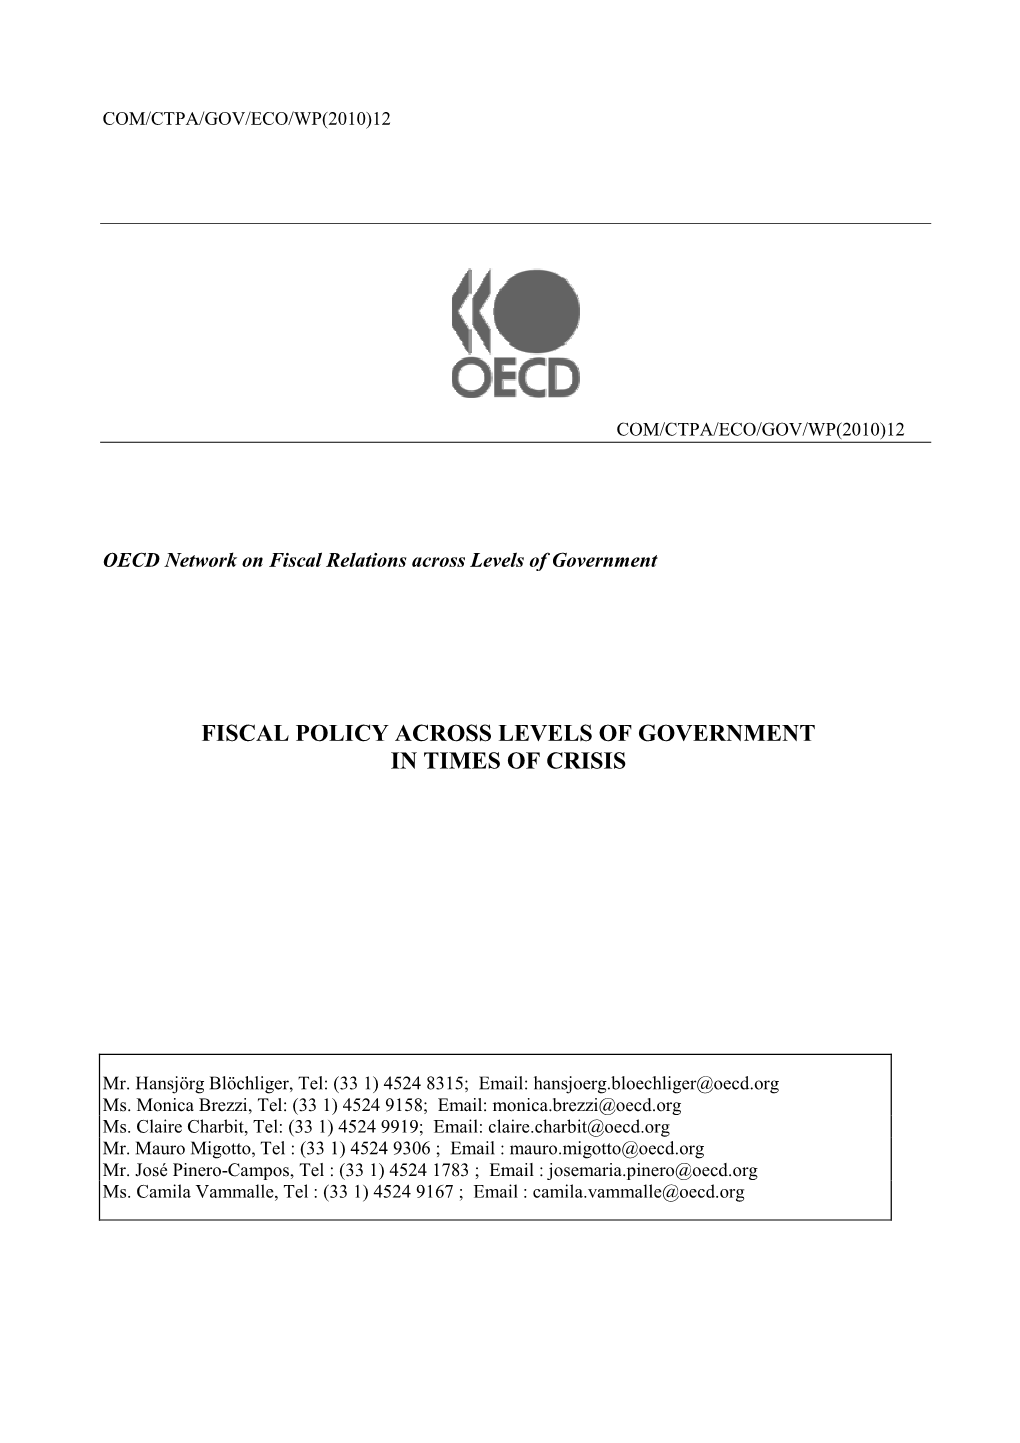 Fiscal Policy Across Levels of Government in Times of Crisis